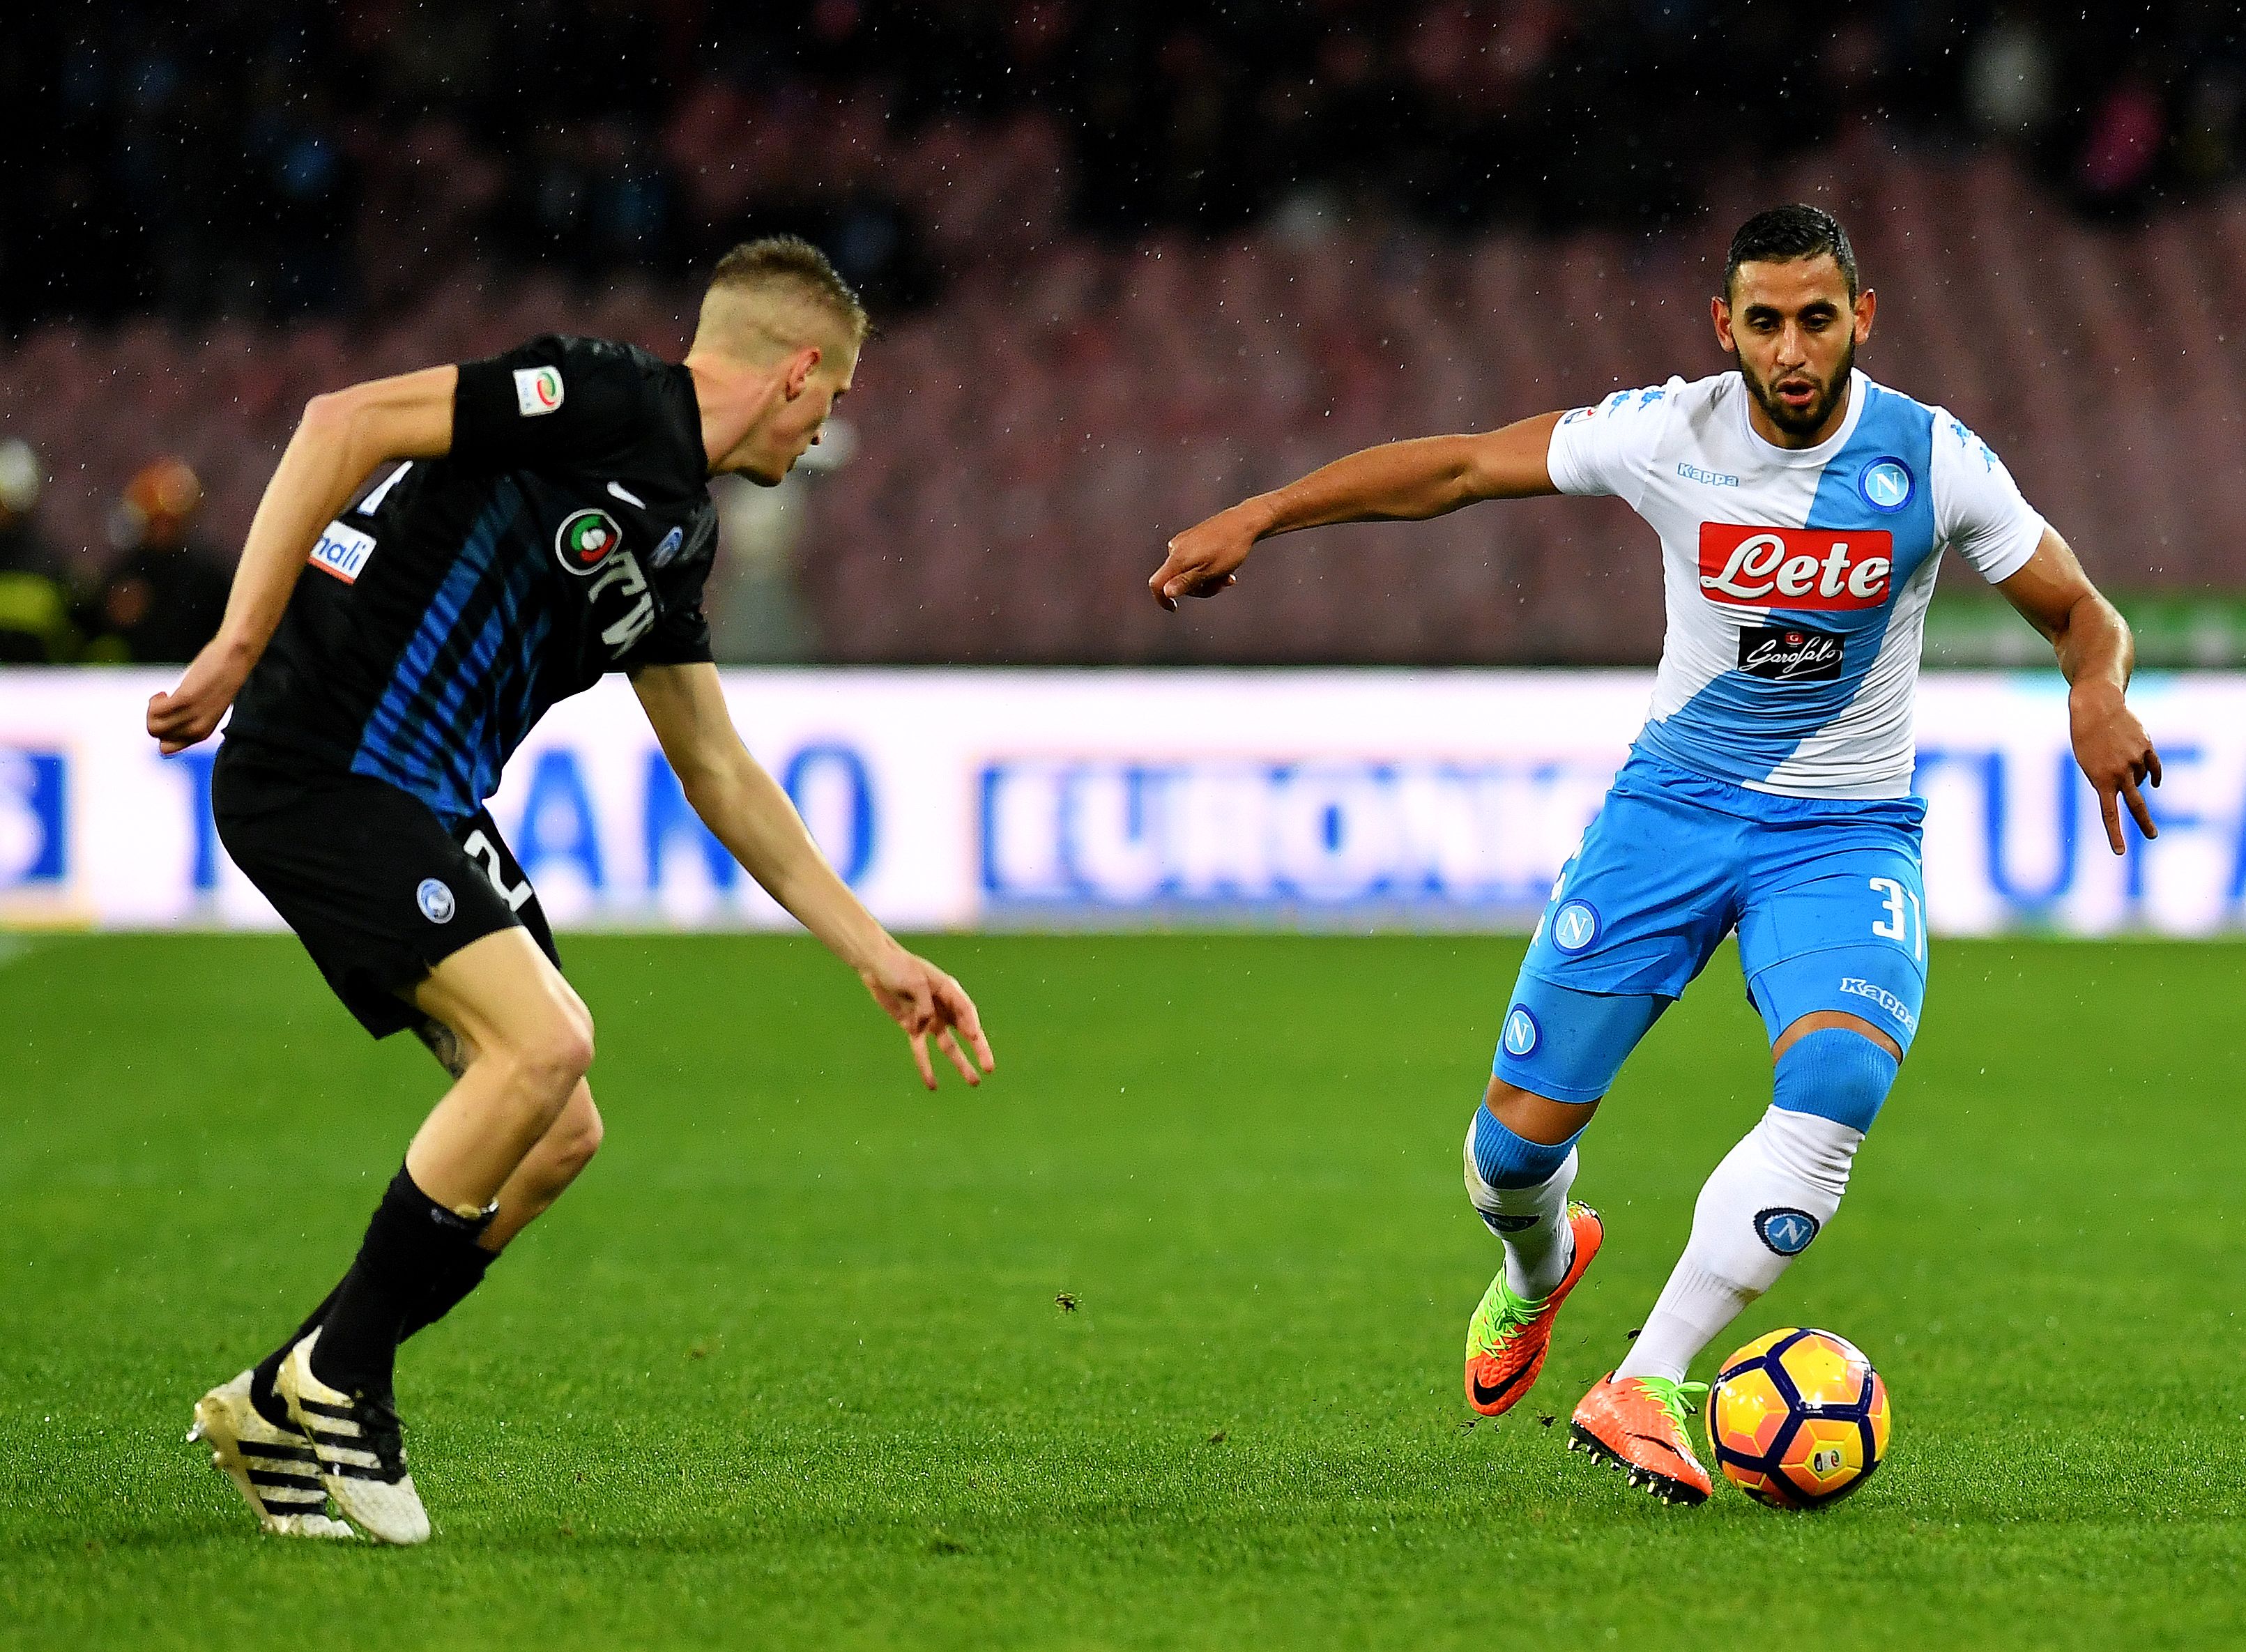 Napoli's defender from Algeria Faouzi Ghoulam (R) fights for the ball with Atalanta's defender Andrea Conti during the Italian Serie A football match between Napoli and Atalanta on February 25, 2017 at San Paolo stadium in Naples. / AFP / ALBERTO PIZZOLI        (Photo credit should read ALBERTO PIZZOLI/AFP/Getty Images)